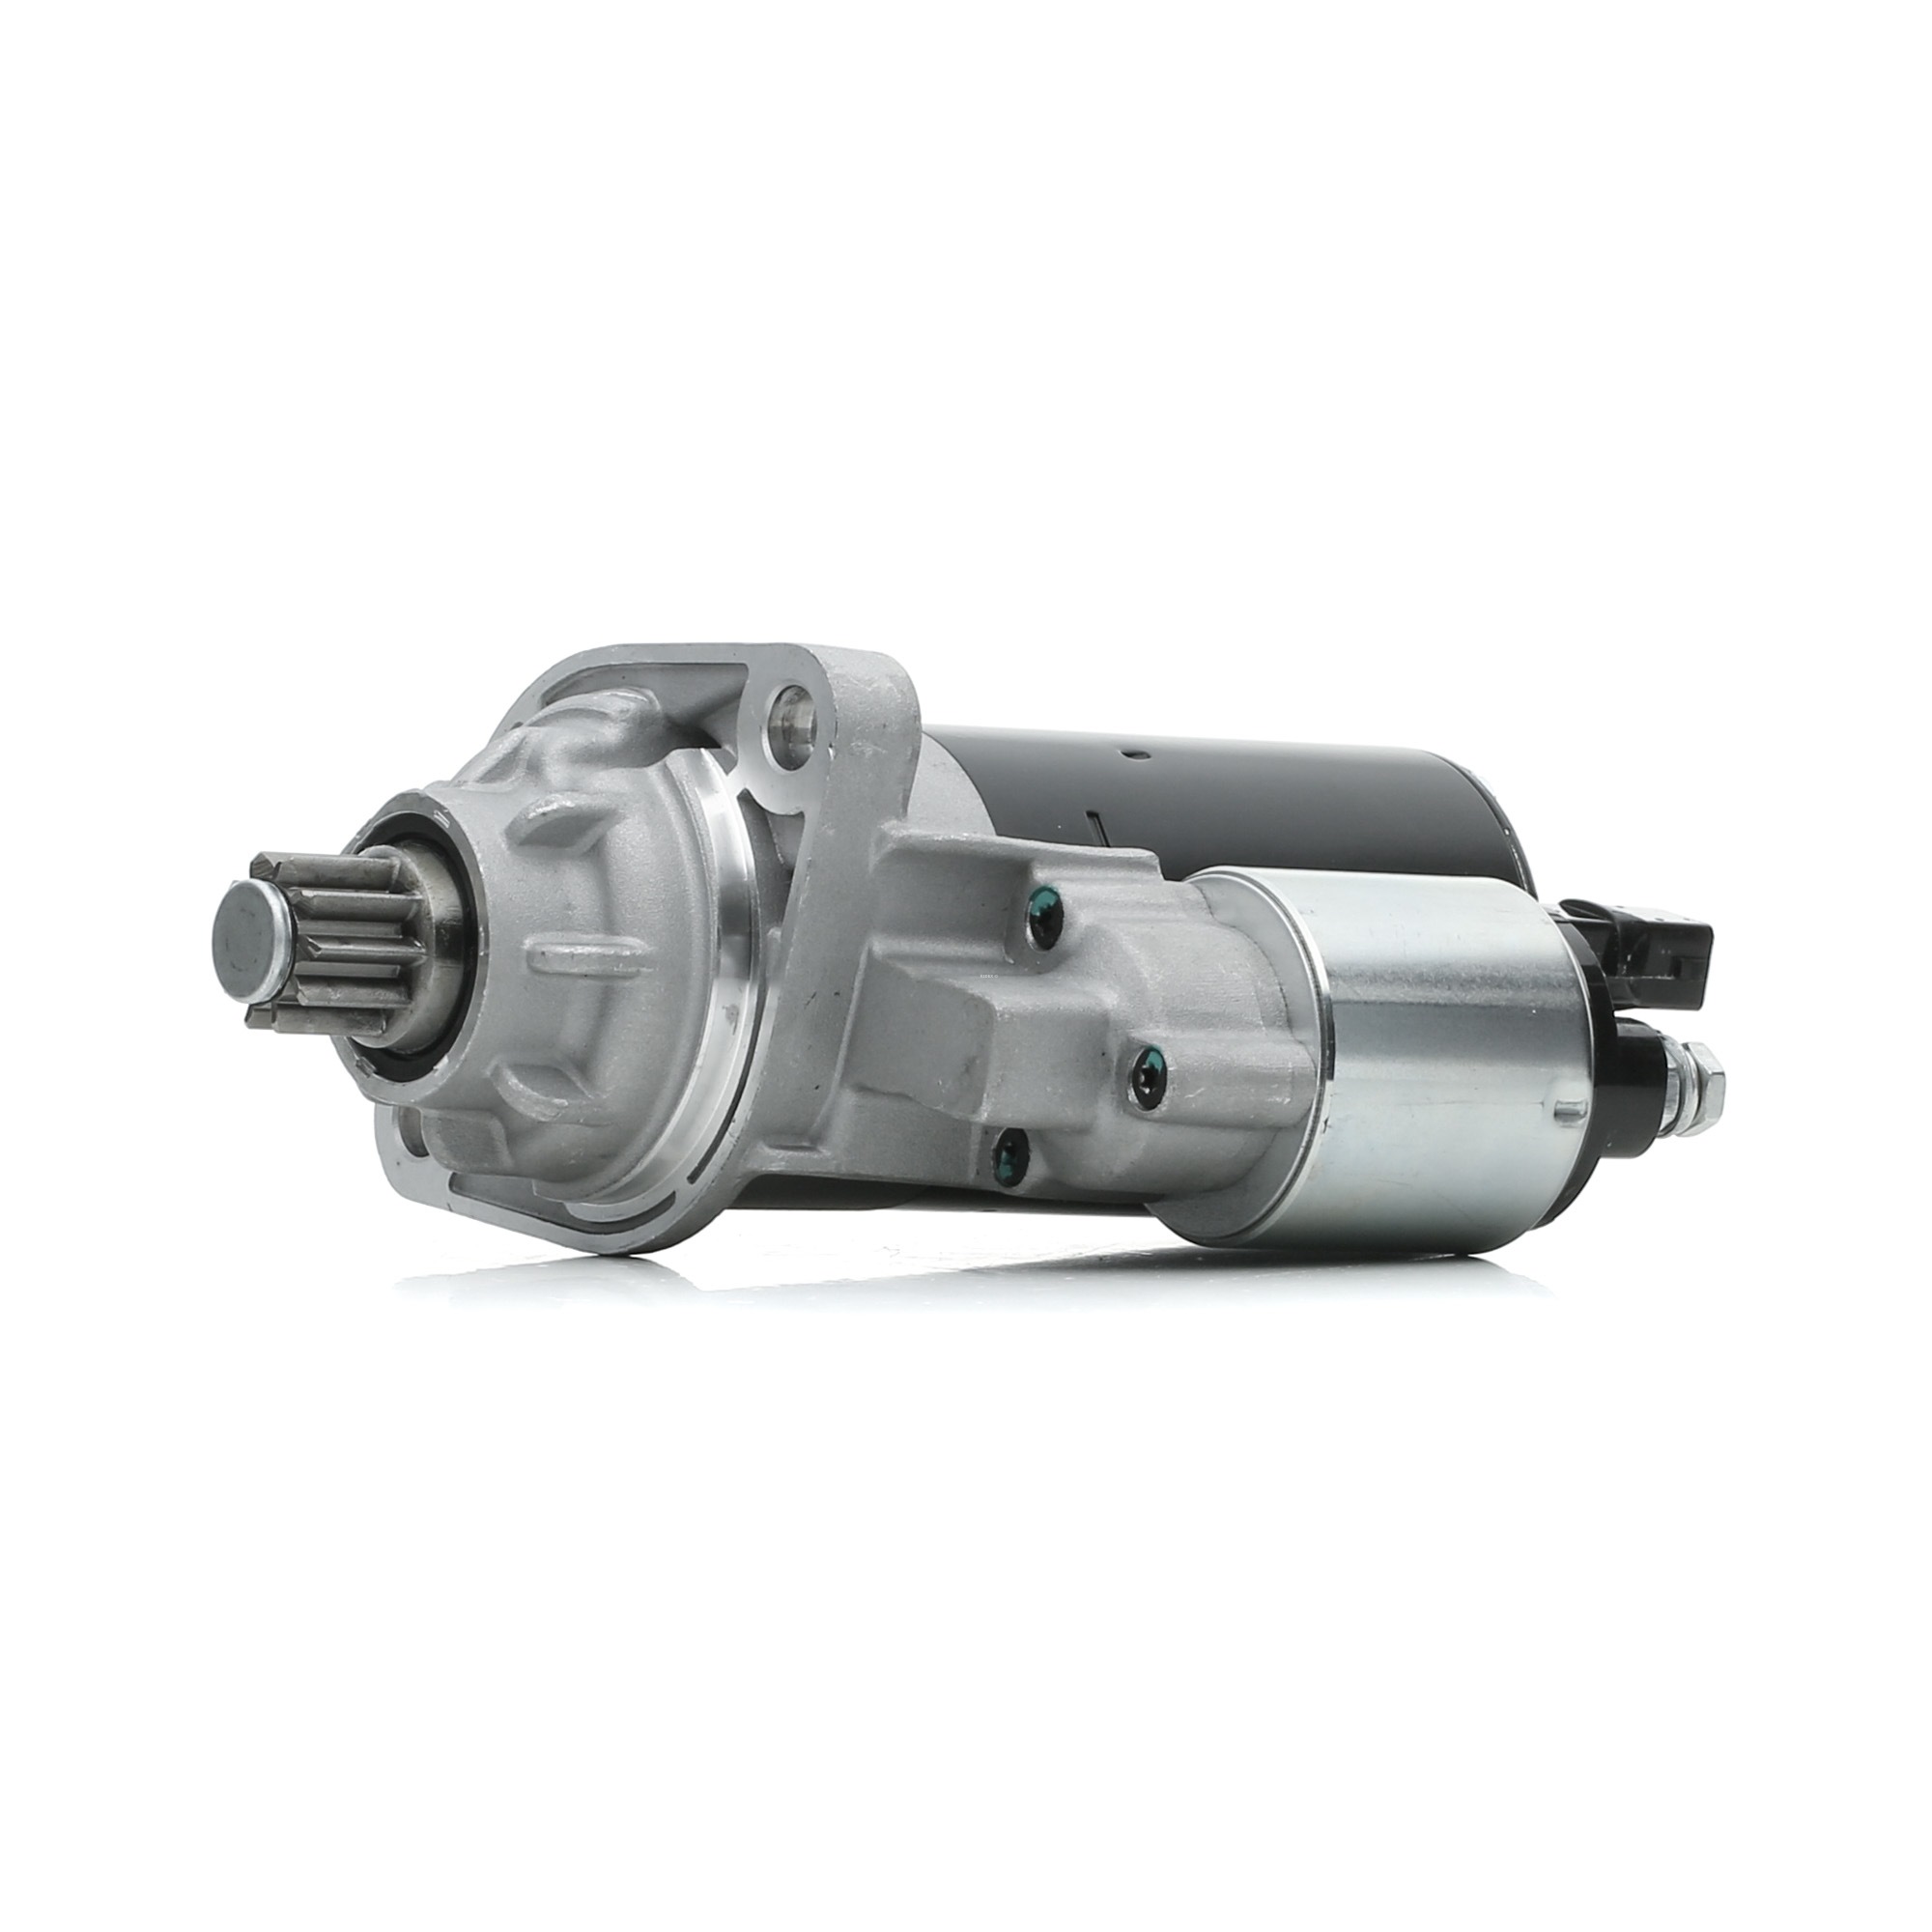 RIDEX 2S0208 Starter motor 12V, 1,1kW, Number of Teeth: 10, with 50(Jet) clamp, M8 B+, 30 (M8), Ø 76 mm